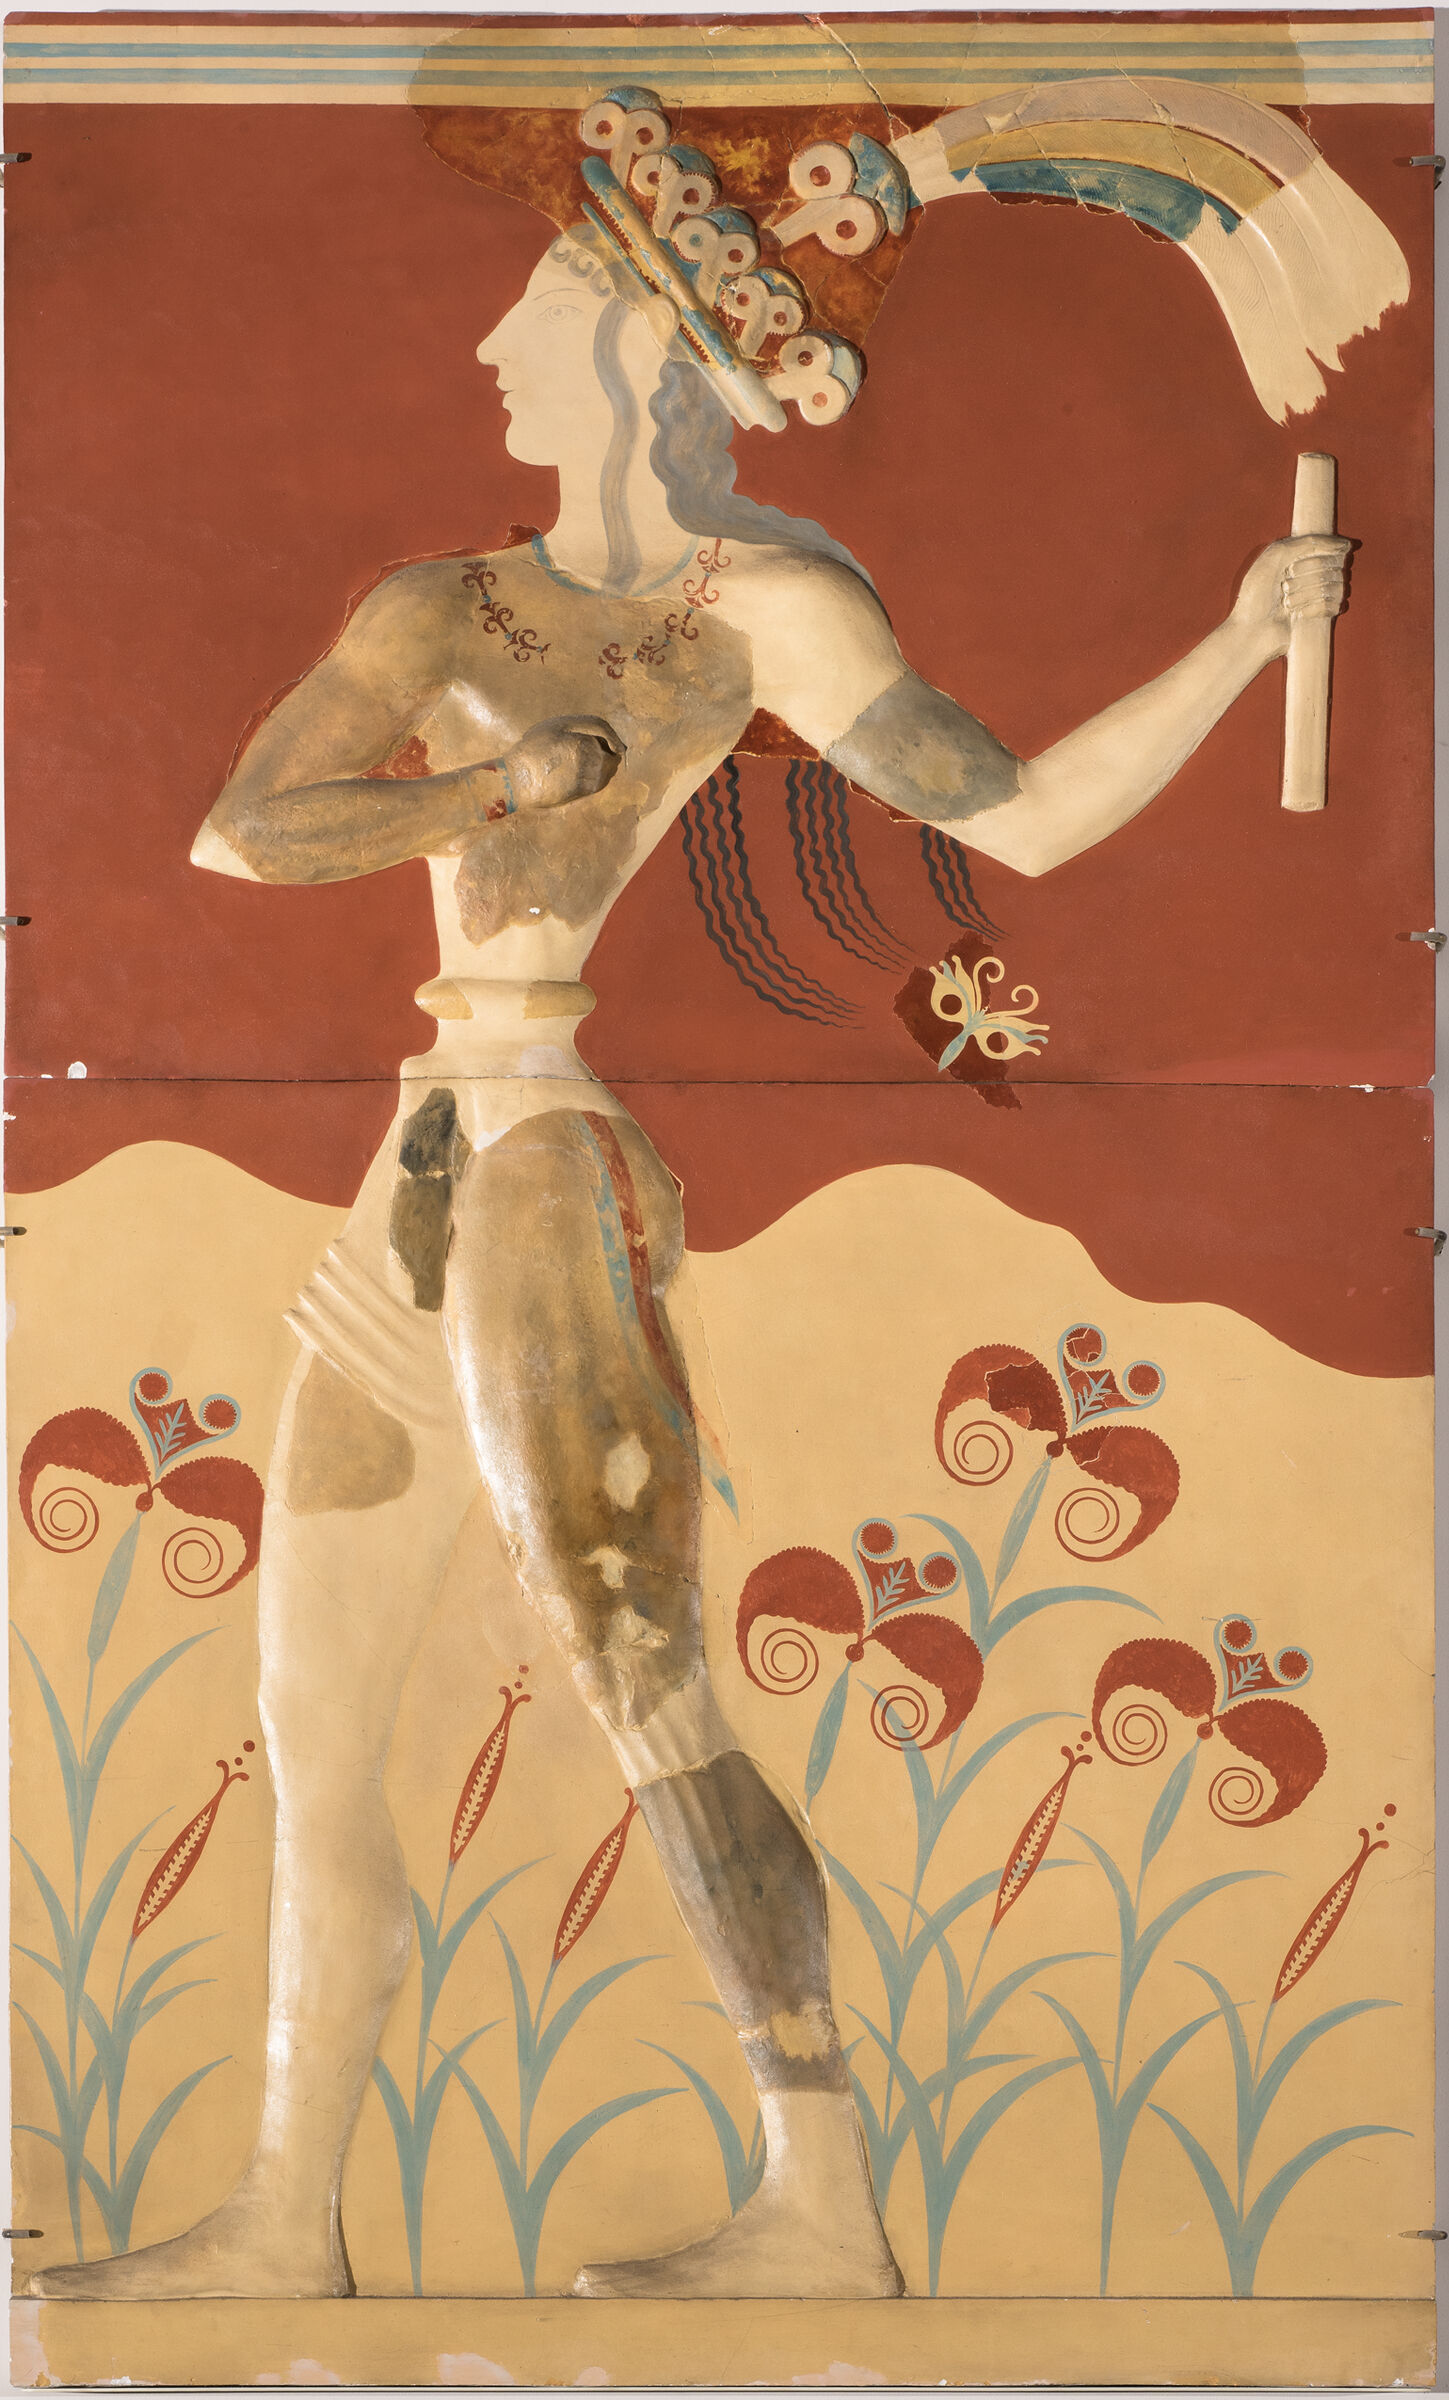 Top Section Of Priest King Or Lily Prince (Reproduction After A Relief From The Palace Of Knossos, Crete)